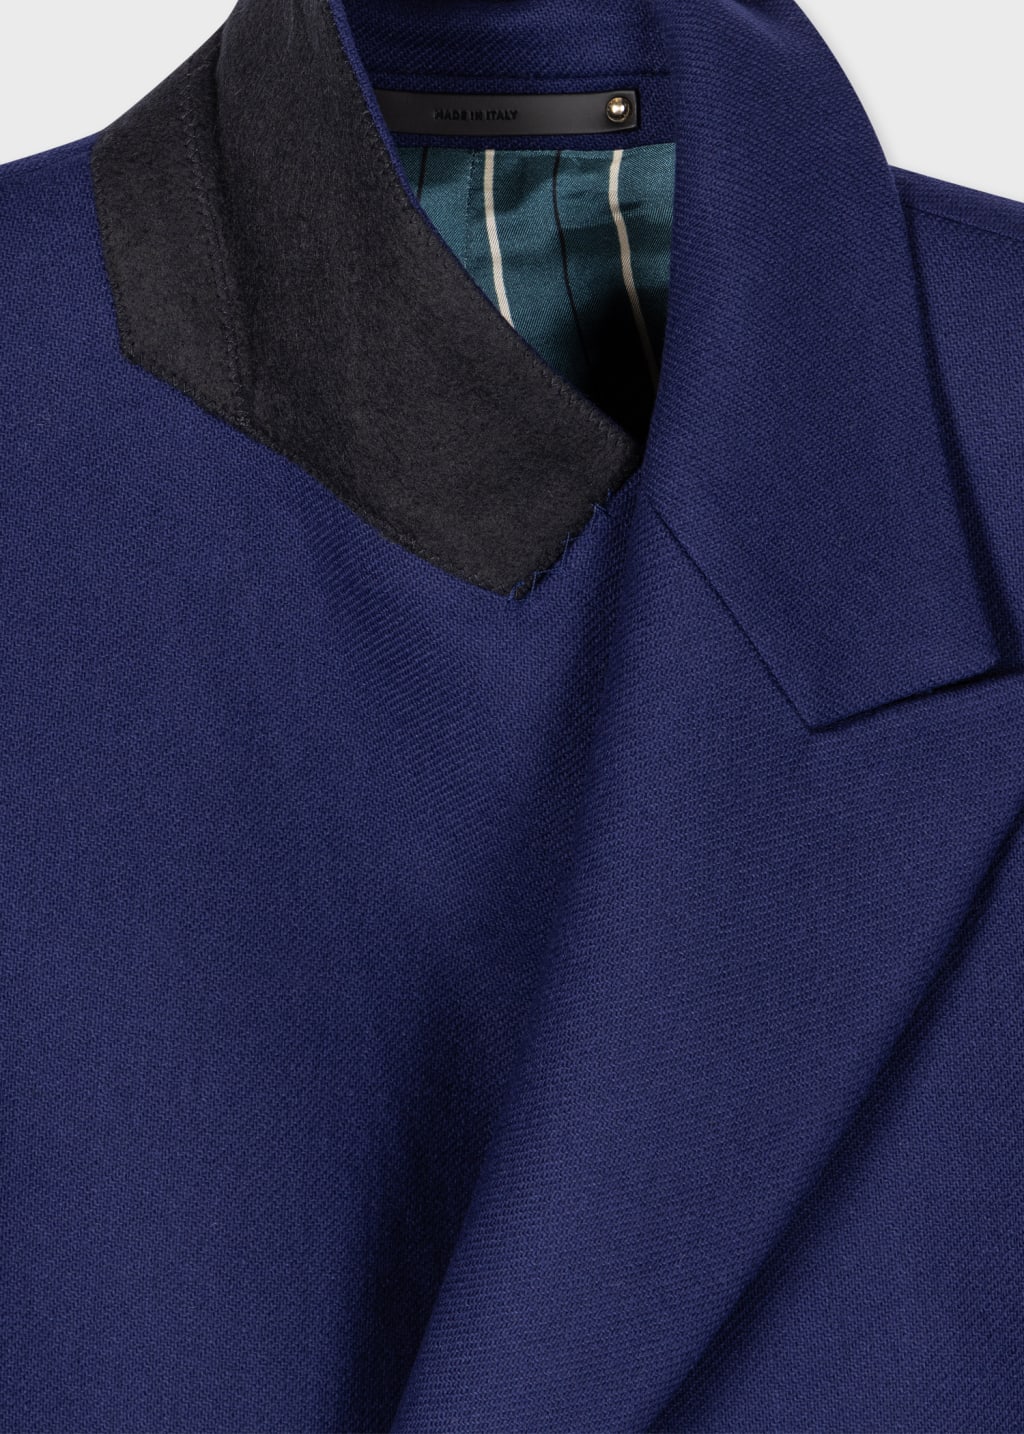 Detail View - Royal Blue Wool-Cashmere Epsom Coat Paul Smith